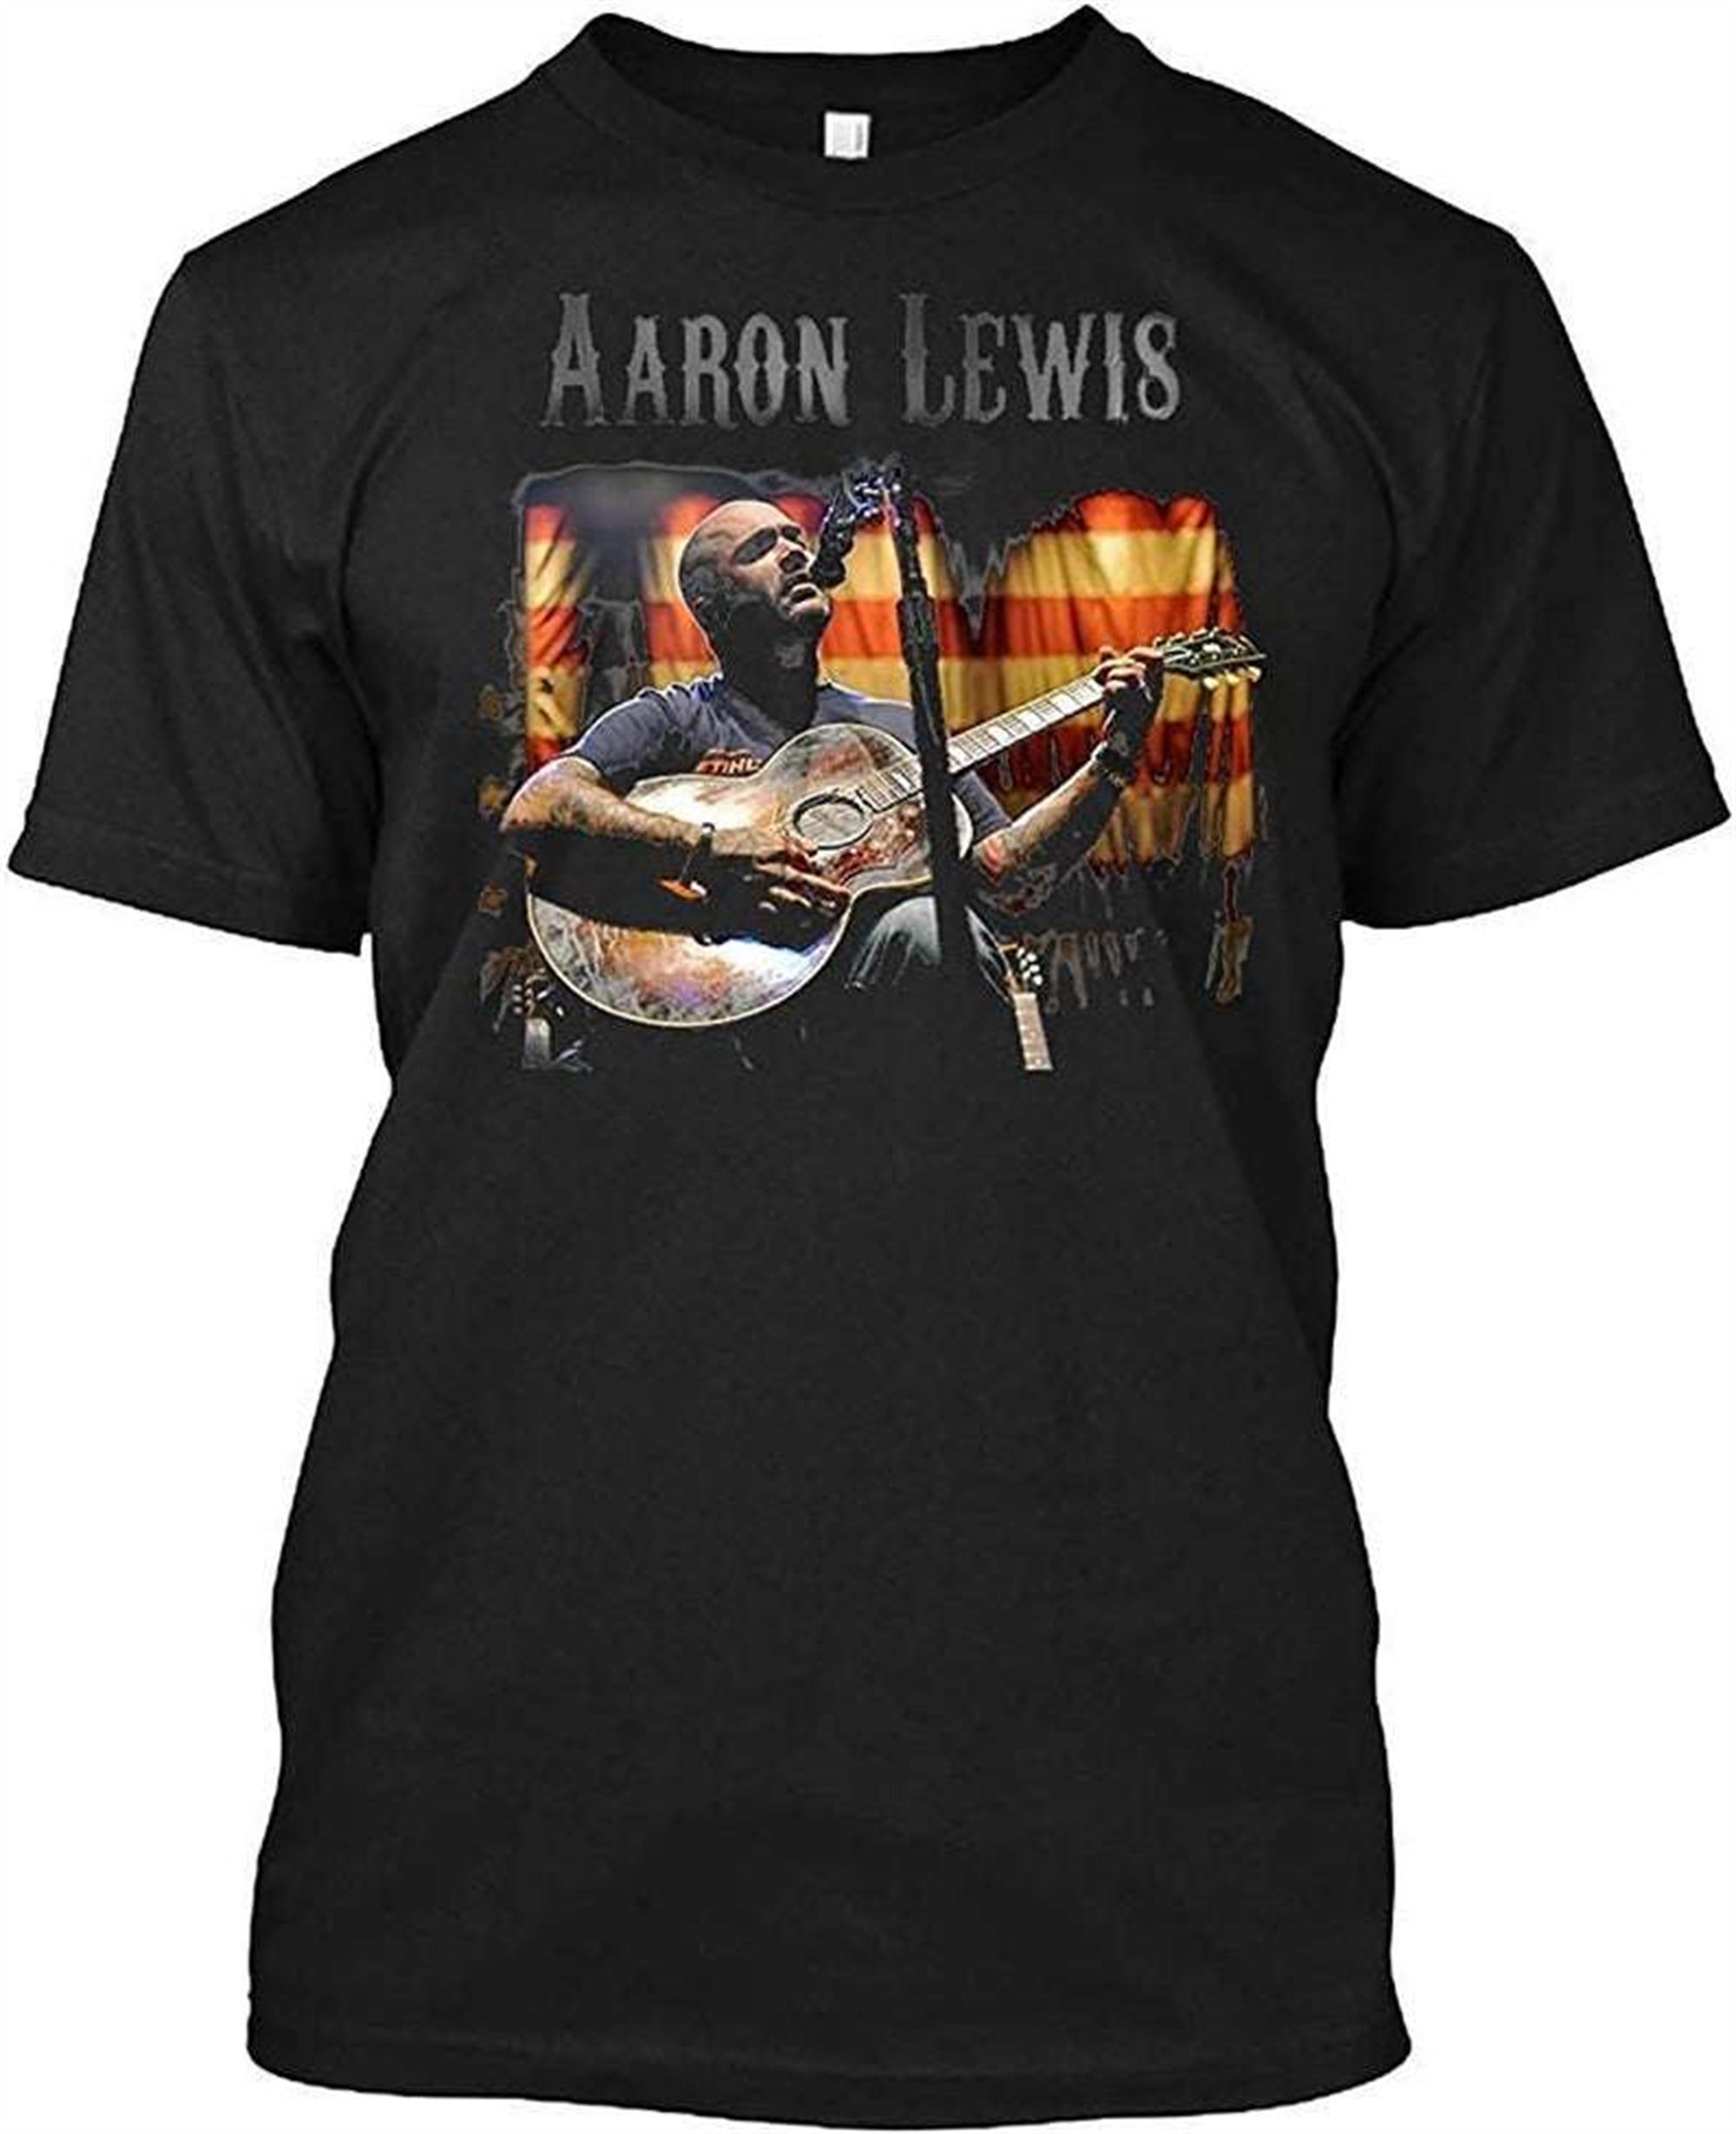 Aaron Lewis Singer T-shirt Full Size Up To 5xl